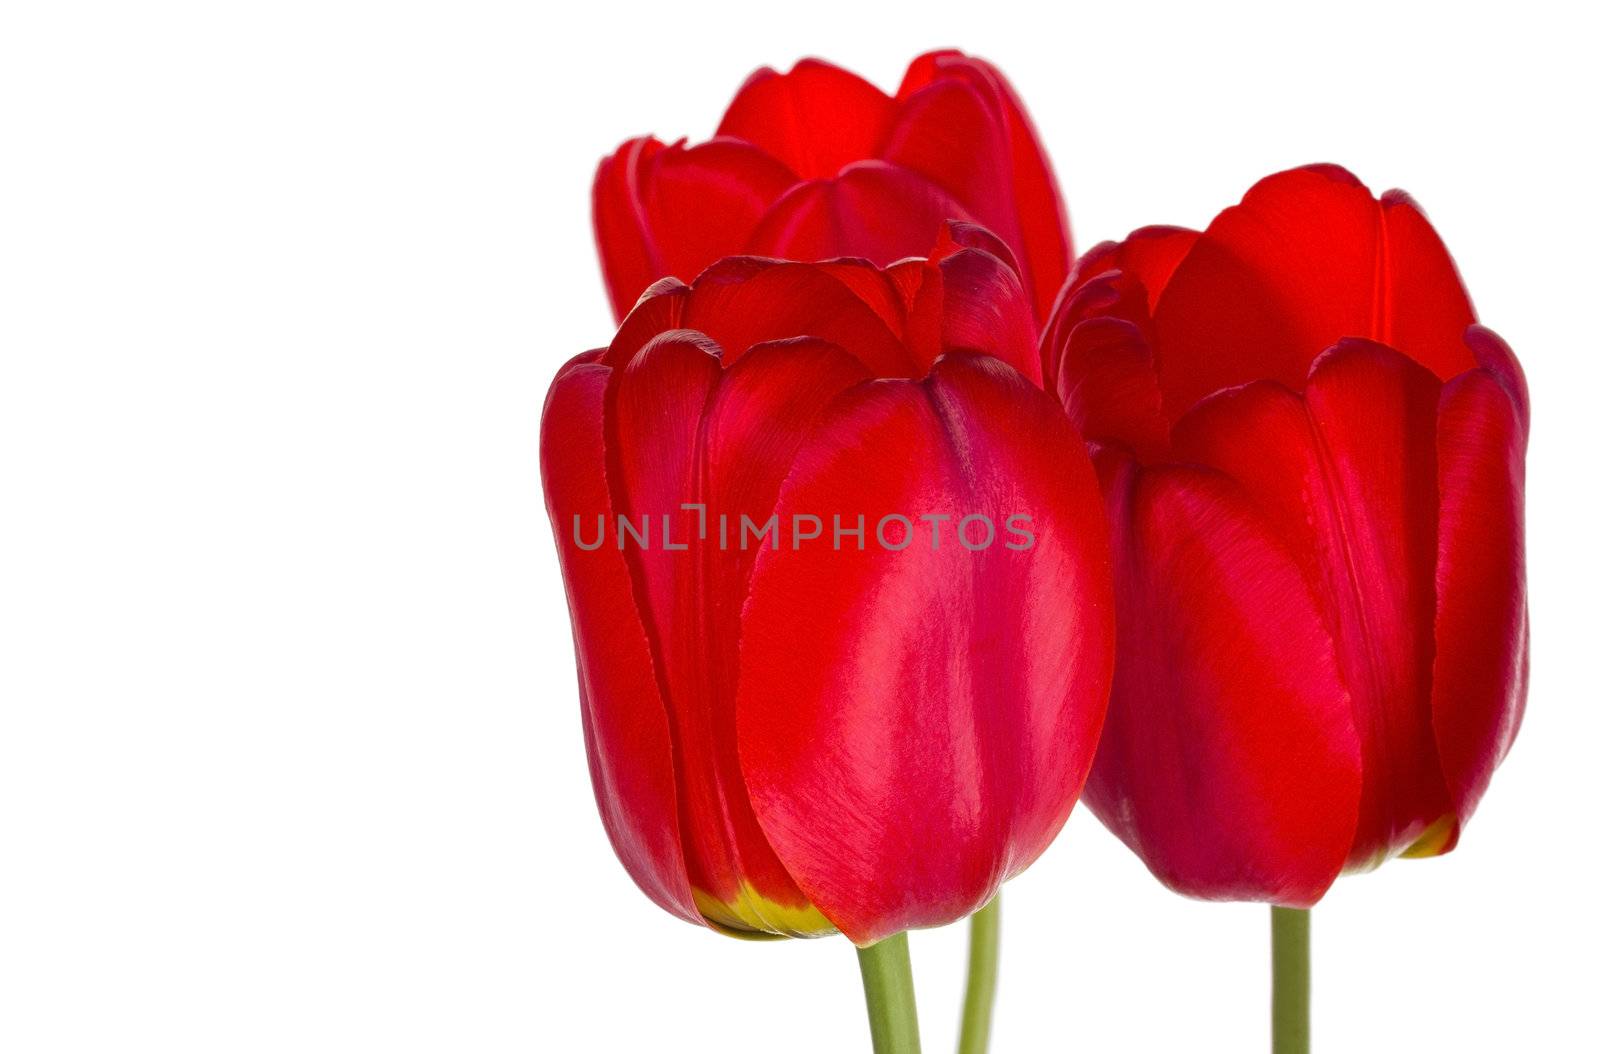 three red tulips by Alekcey